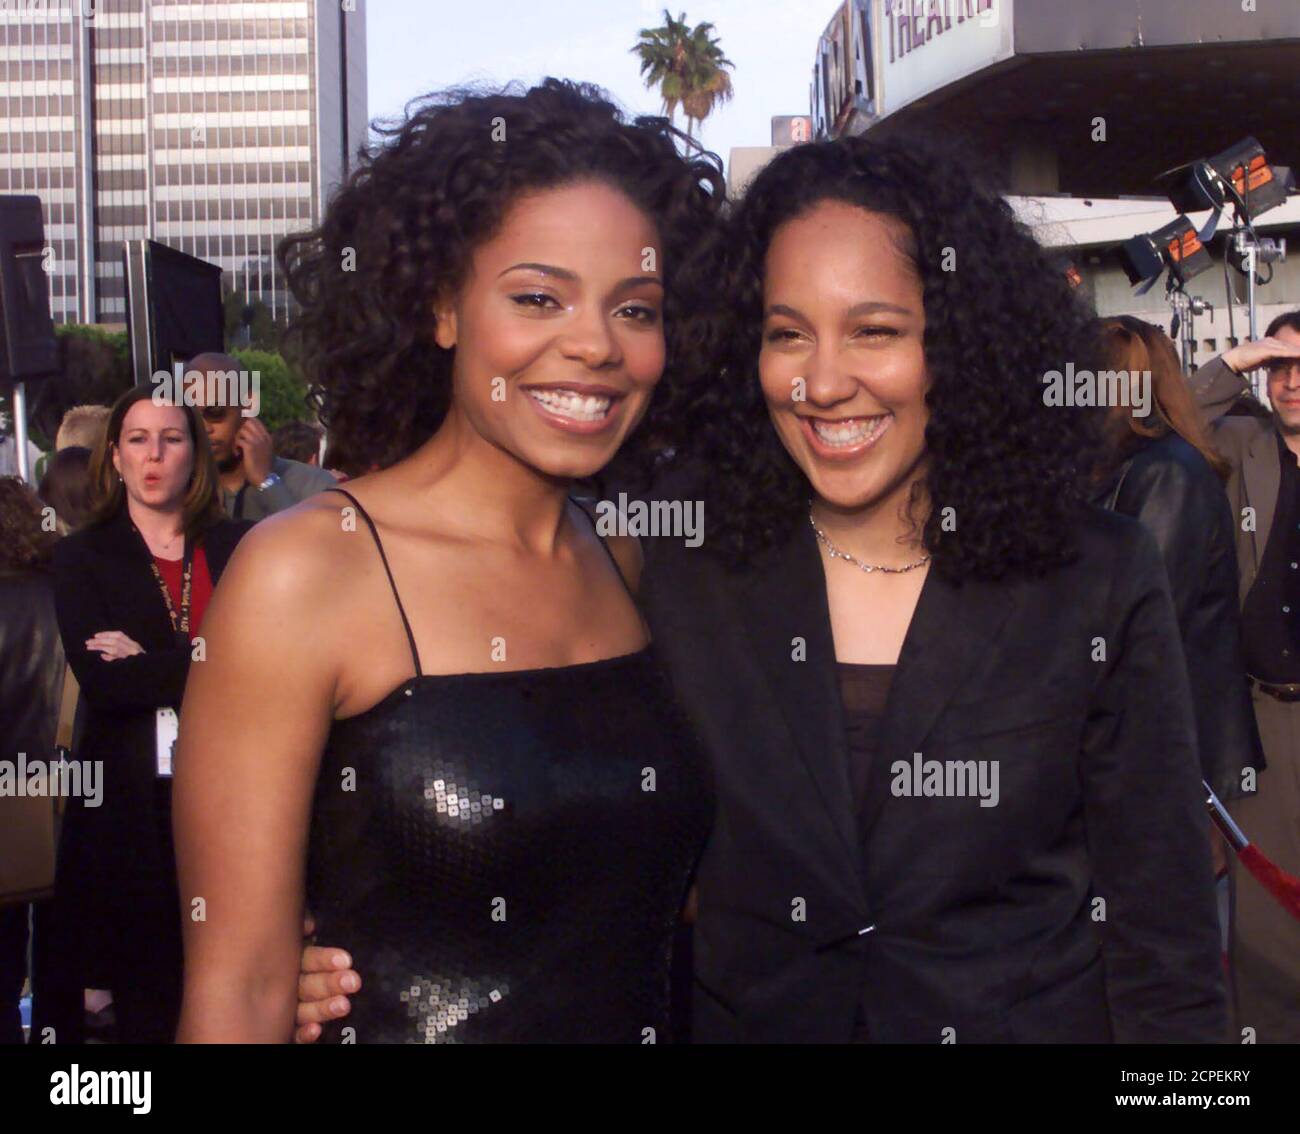 Actress Sanaa Lathan (L) star of the new film "Love and Basketball" poses  with the film's writer and director Gina Prince-Bythewood, as they arrive  at the film's premiere April 16 in Hollywood.